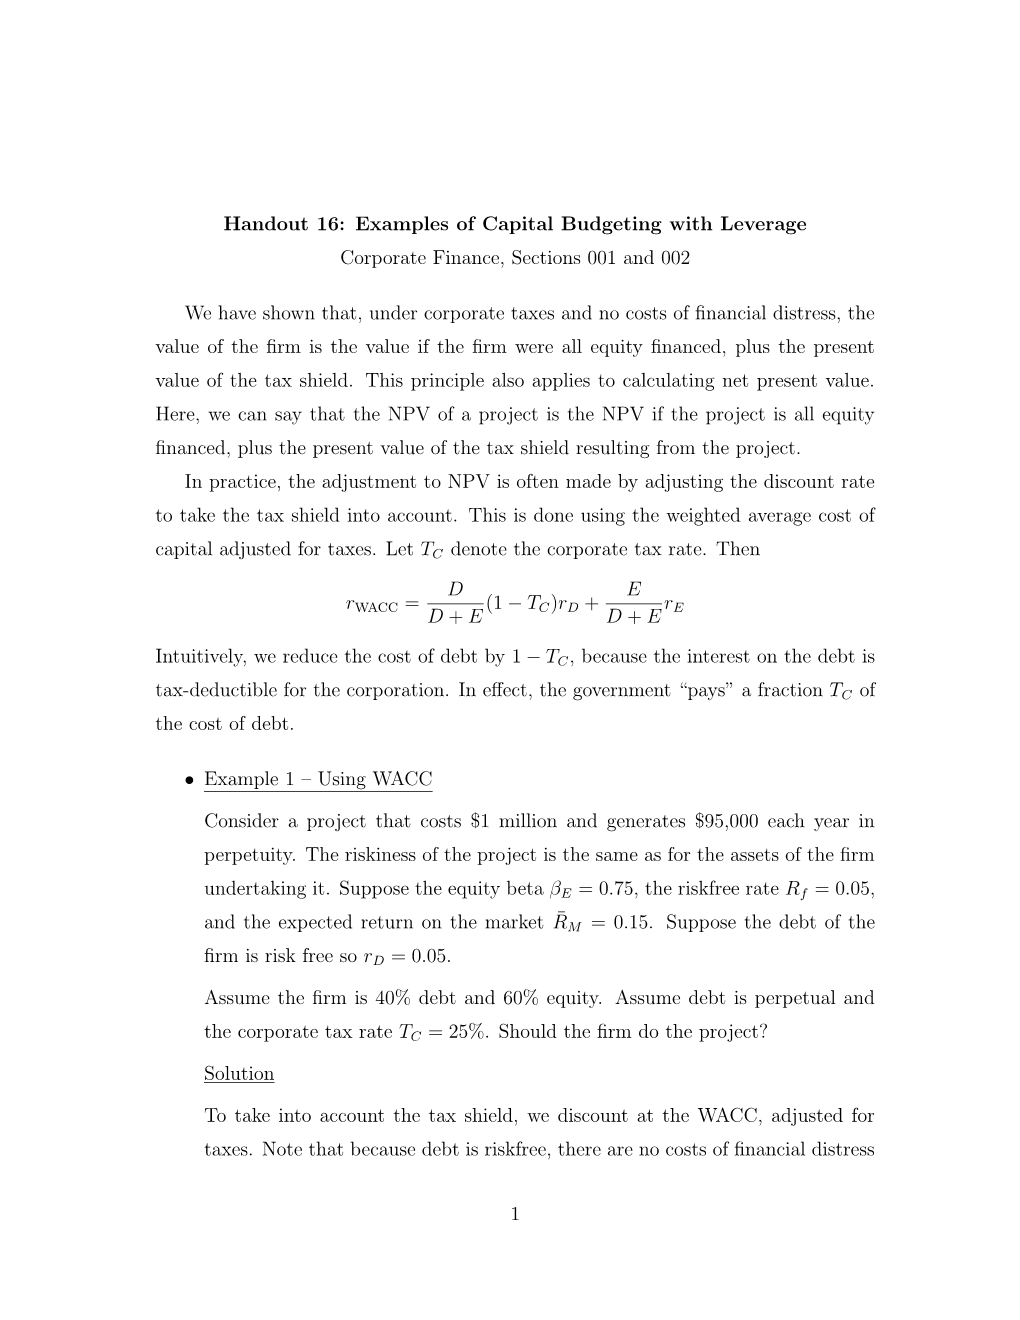 Handout 16: Examples of Capital Budgeting with Leverage Corporate Finance, Sections 001 and 002